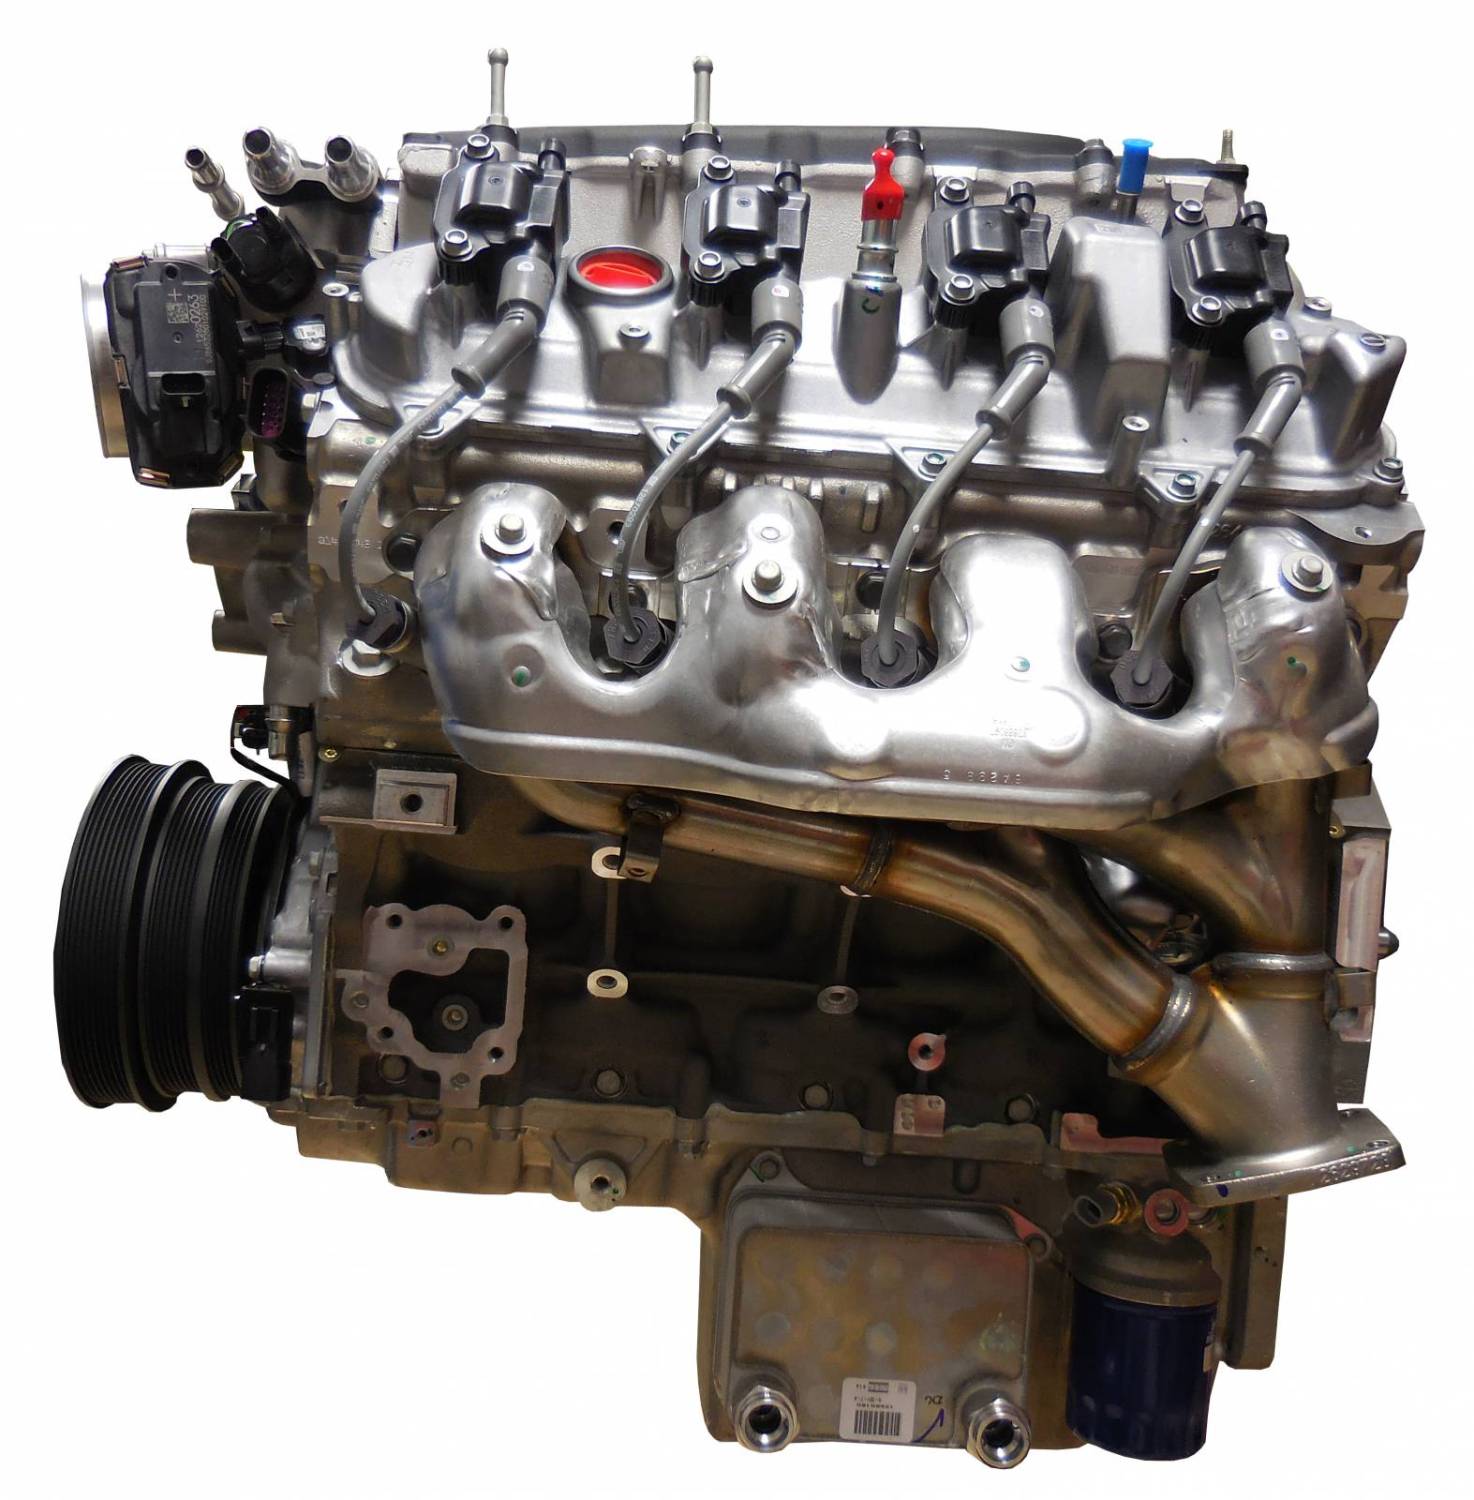 19417413 - CPP 2017-2018 LT4 6.2L Supercharged Crate Engine 650 hp ...